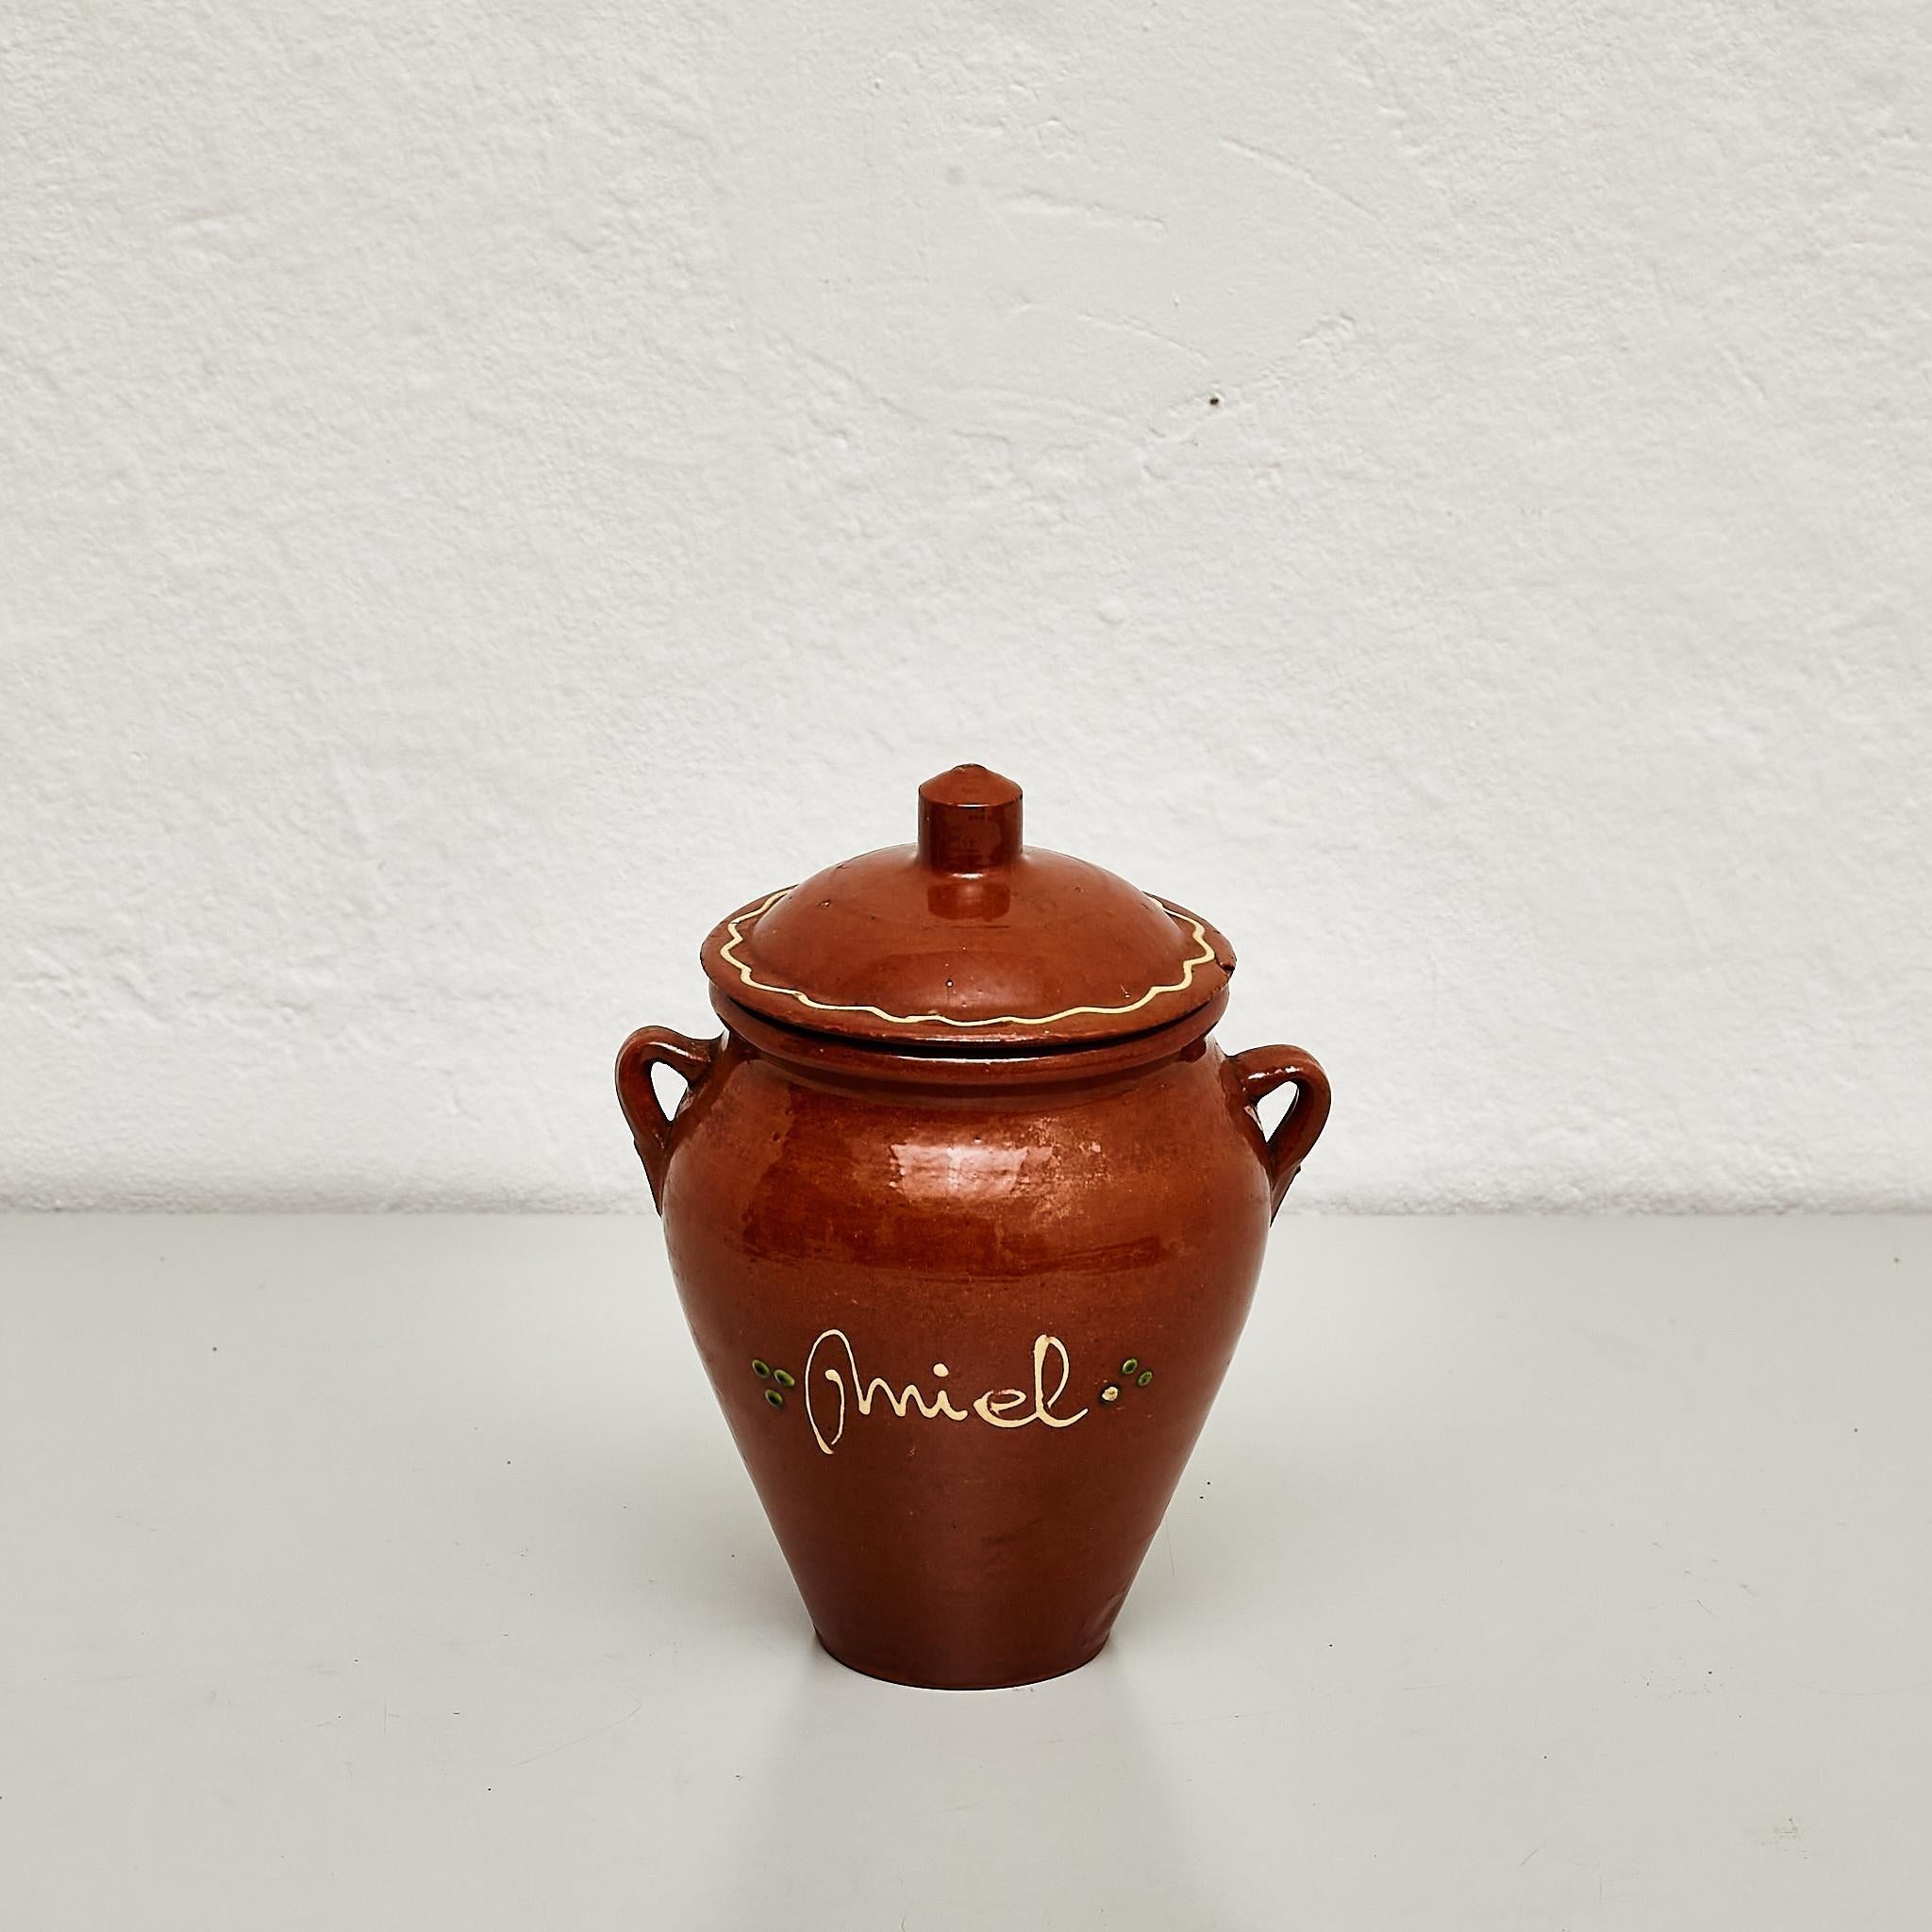 Early 20th century traditional Spanish ceramic honey pot.

Manufactured in Spain, early 20th century.

In original condition with minor wear consistent of age and use, preserving a beautiful patina.

Materials: 
Ceramic

Important information